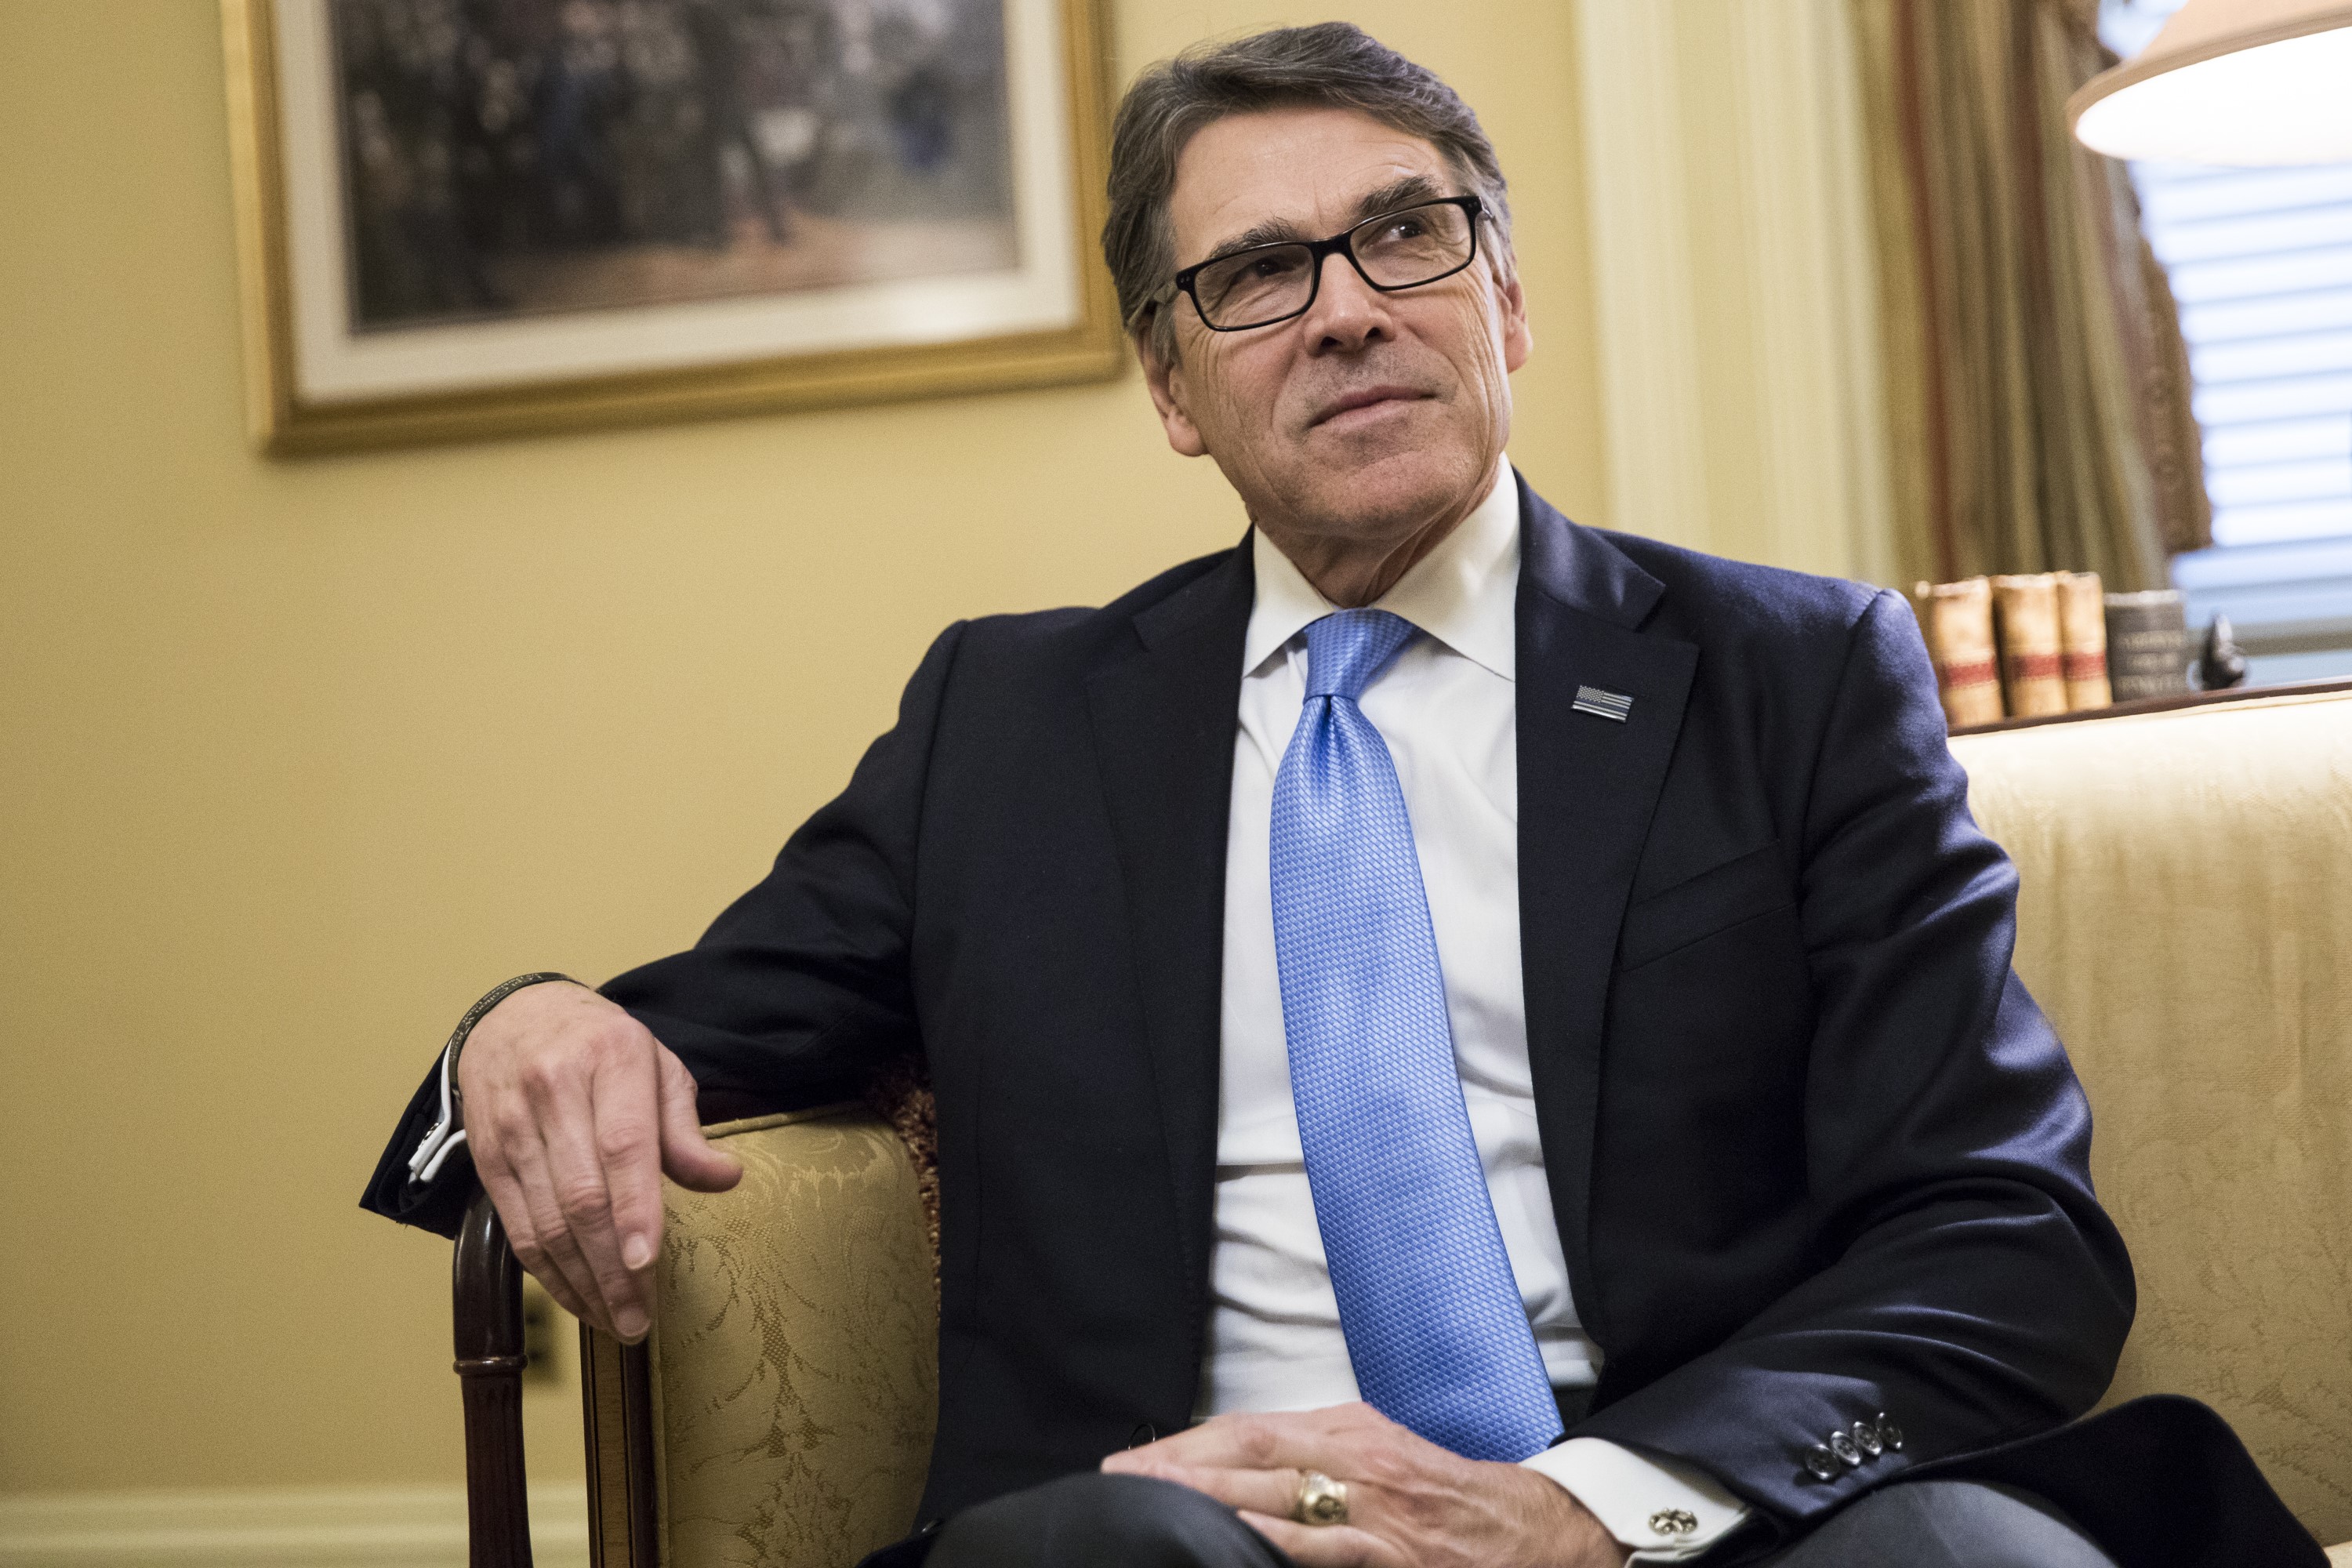 Former Governor of Texas Rick Perry, who is President-elect Trumps pick to be Energy Secretary, meets with Senate Majority Leader Mitch McConnell at the U.S. Capitol in Washington, on Jan. 4, 2017. (Samuel Corum—Anadolu Agency/Getty Images)